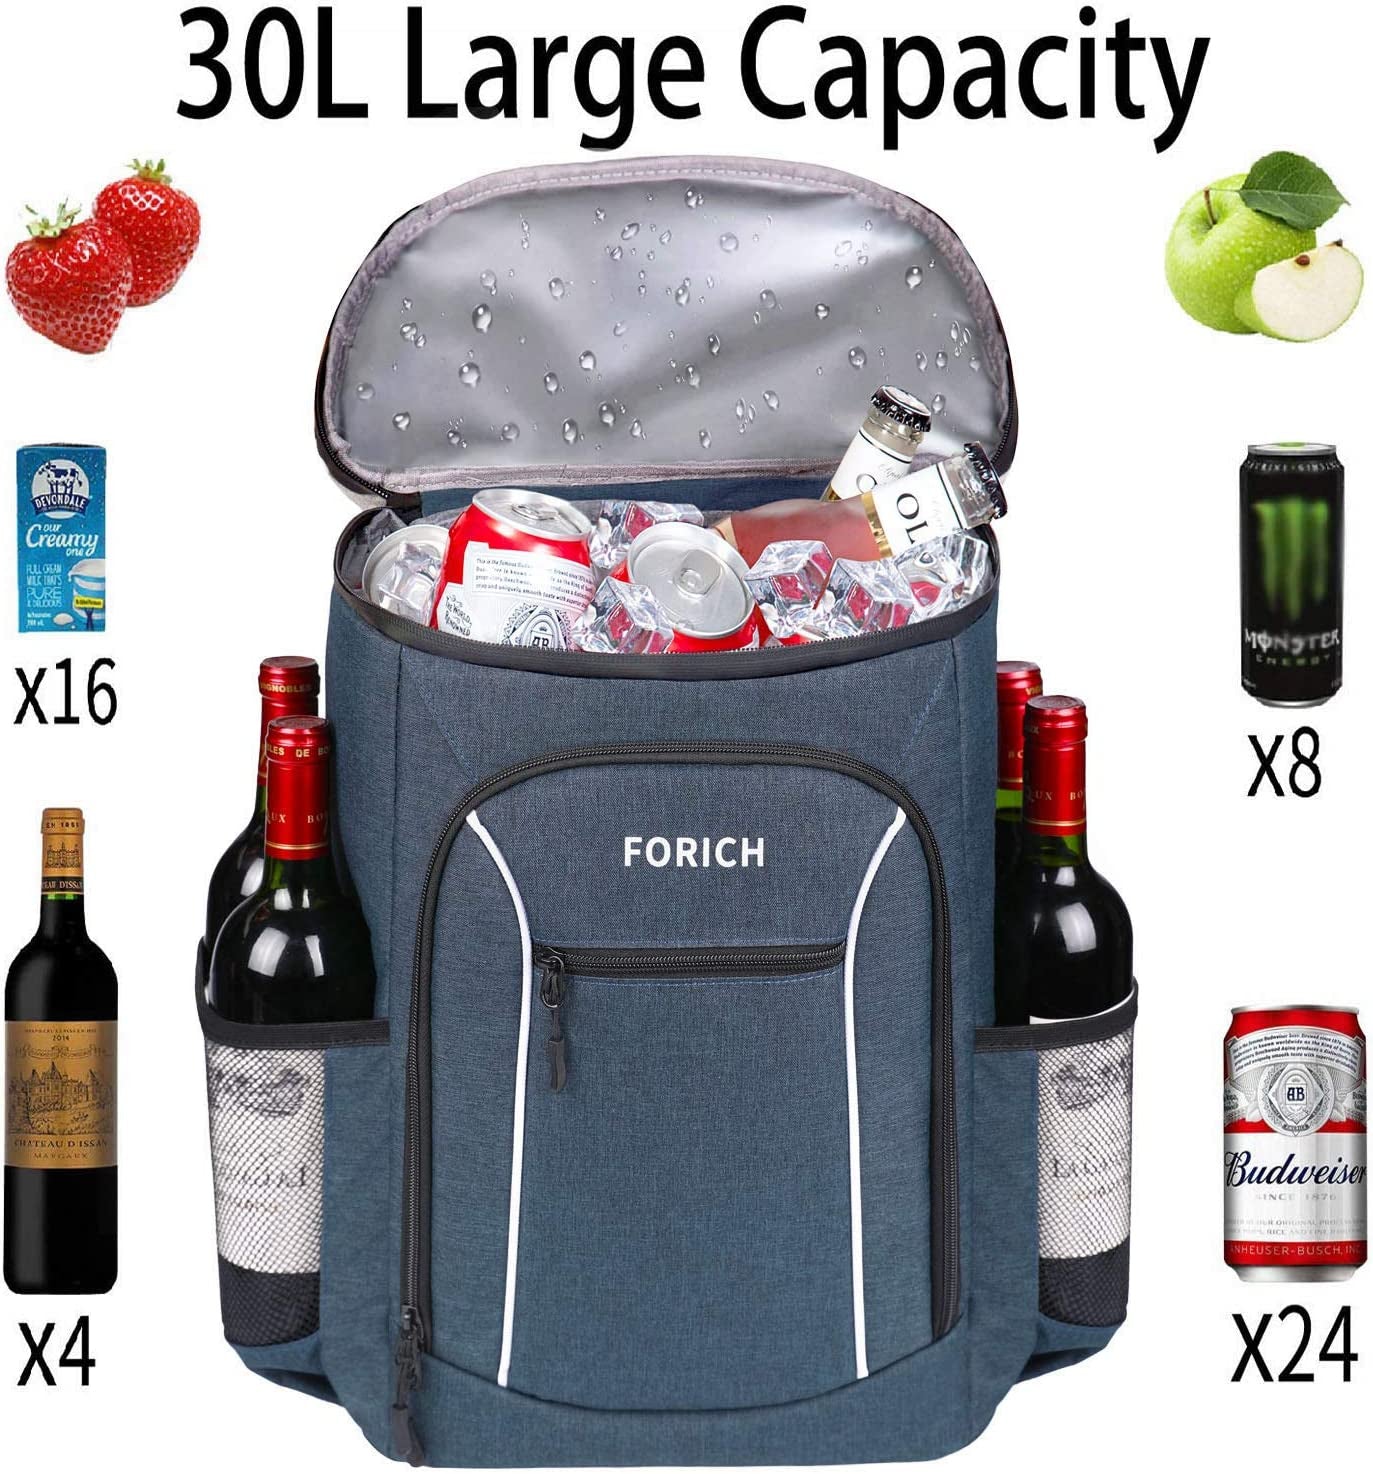 FORICH Insulated Cooler Backpack Lightweight Soft Cooler Bag Leakproof Backpack Cooler for Men Women to Lunch Work Picnic Beach Camping Hiking Park Day Trips, 30 Cans